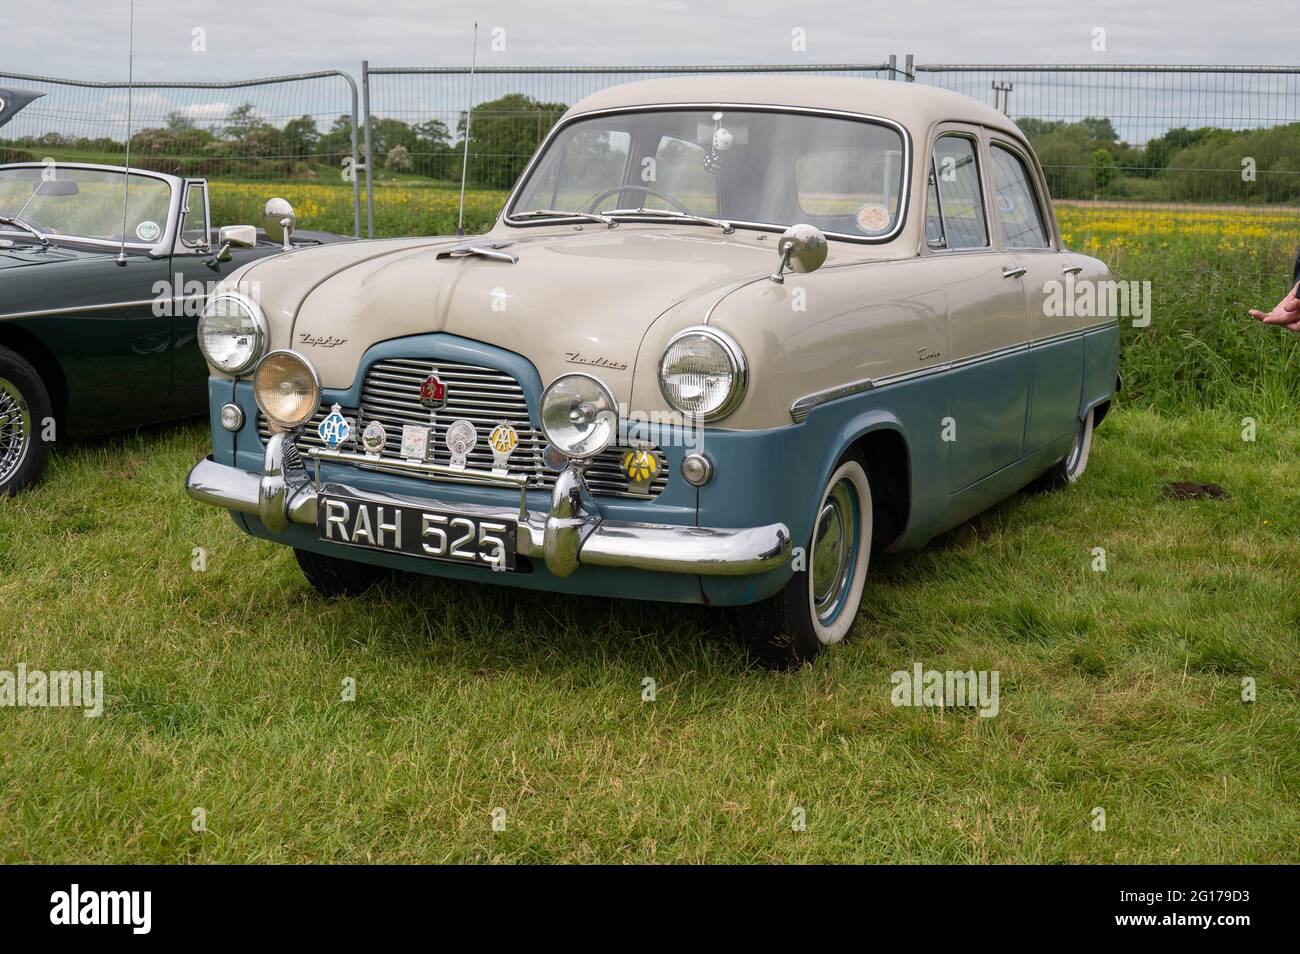 A vintage classic two tone Zephyr Zodiac at a car rally in norfolk Stock Photo